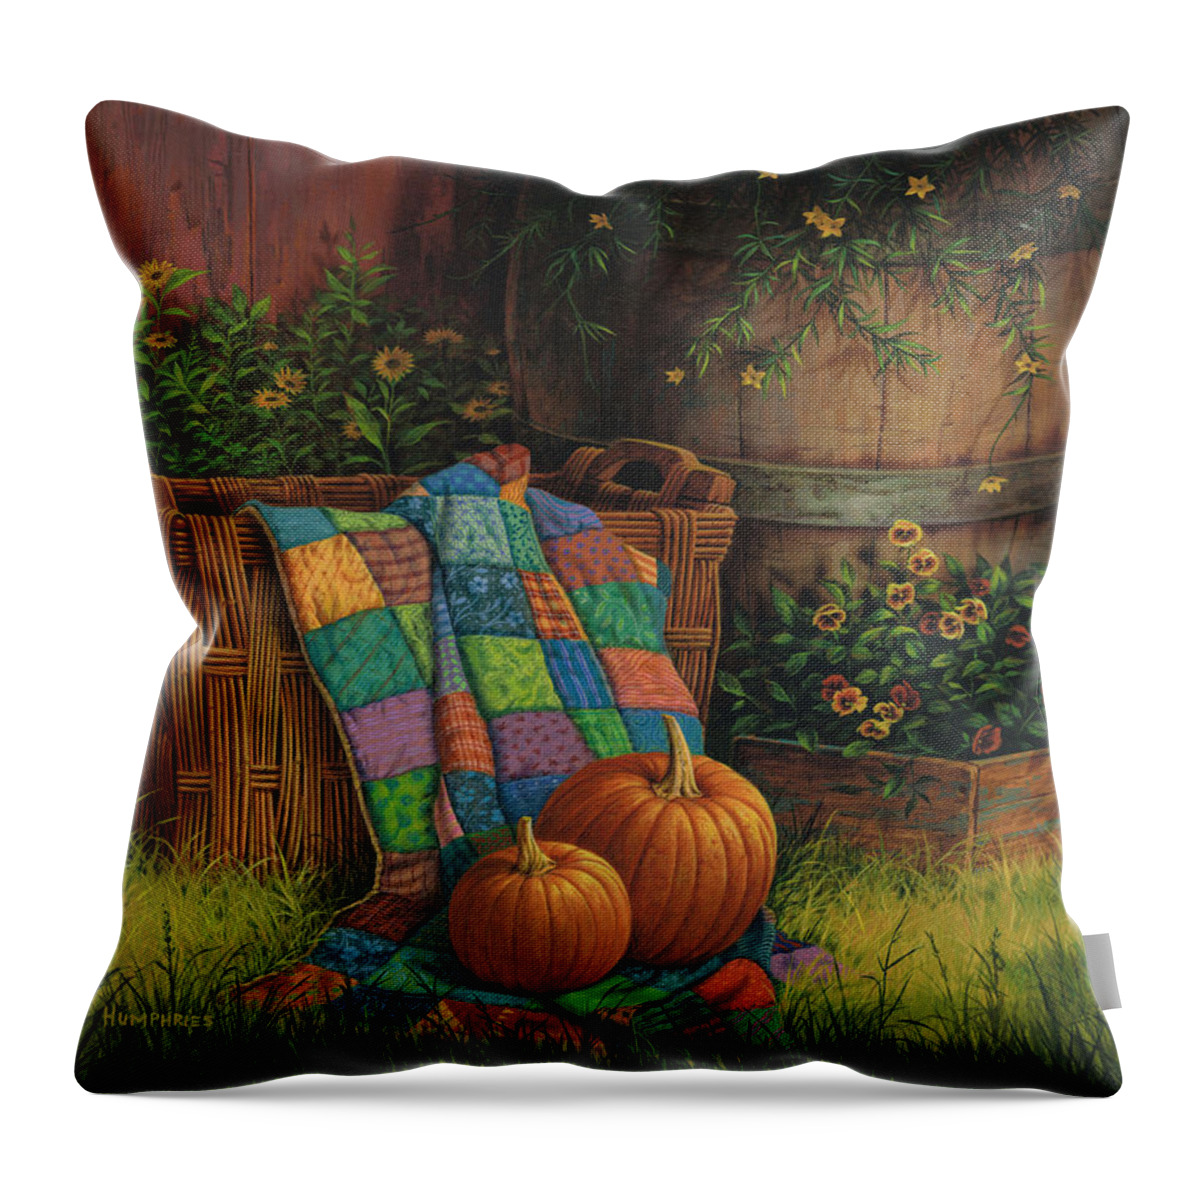 Michael Humphries Throw Pillow featuring the painting Pumpkins and Patches by Michael Humphries